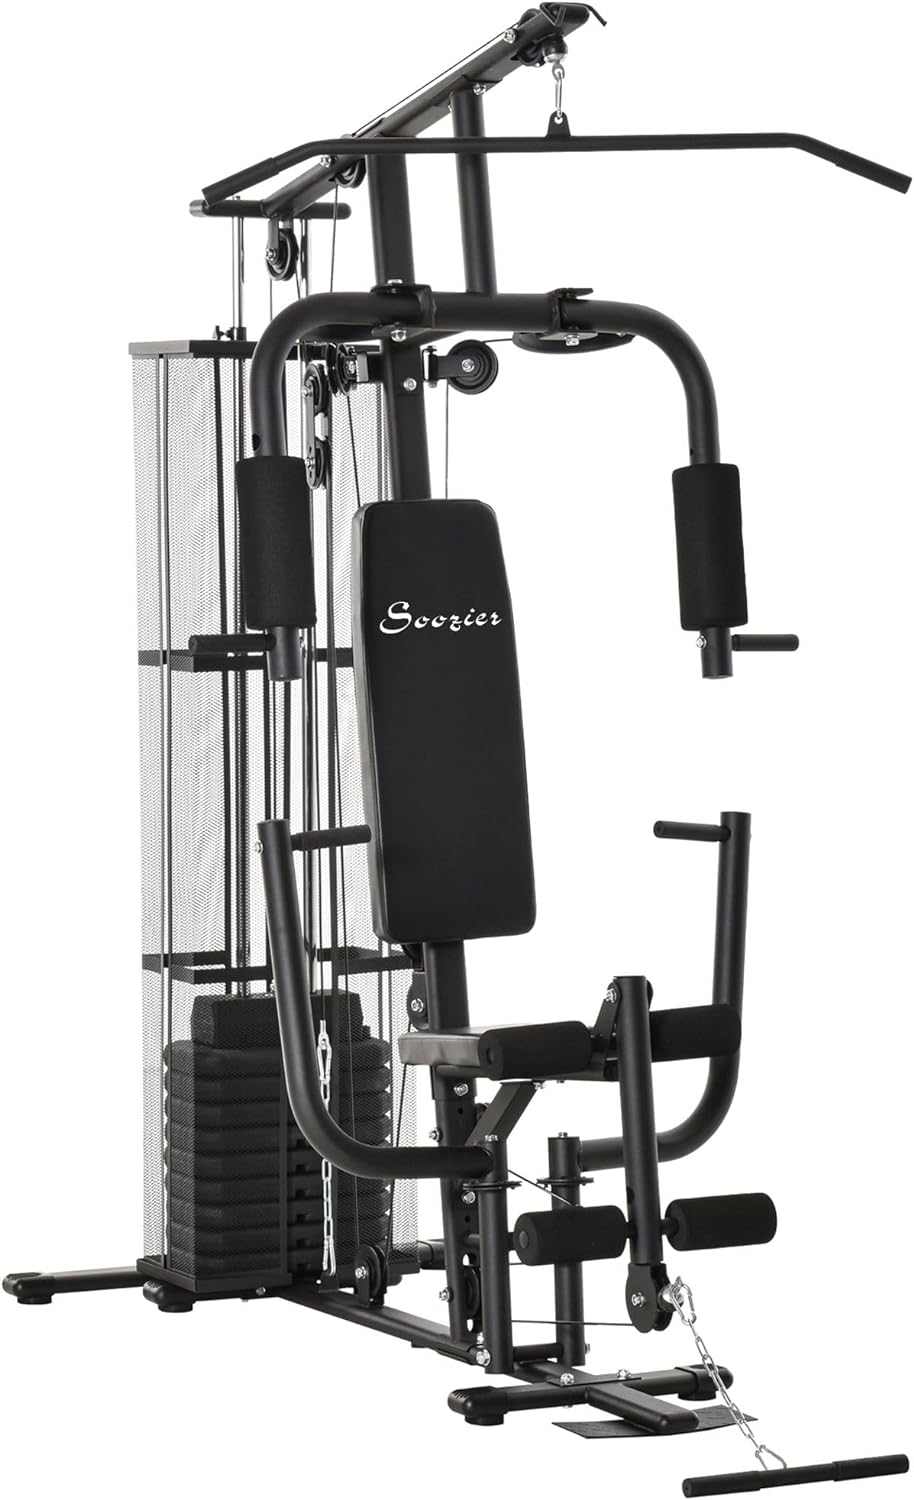 Soozier Home Gym, Multifunction Gym Equipment Workout Station with 100Lbs Weight Stack for LAT Pulldown, Leg Extensions, Preacher Bicep Curls, Triceps Pulldowns, Chest Press